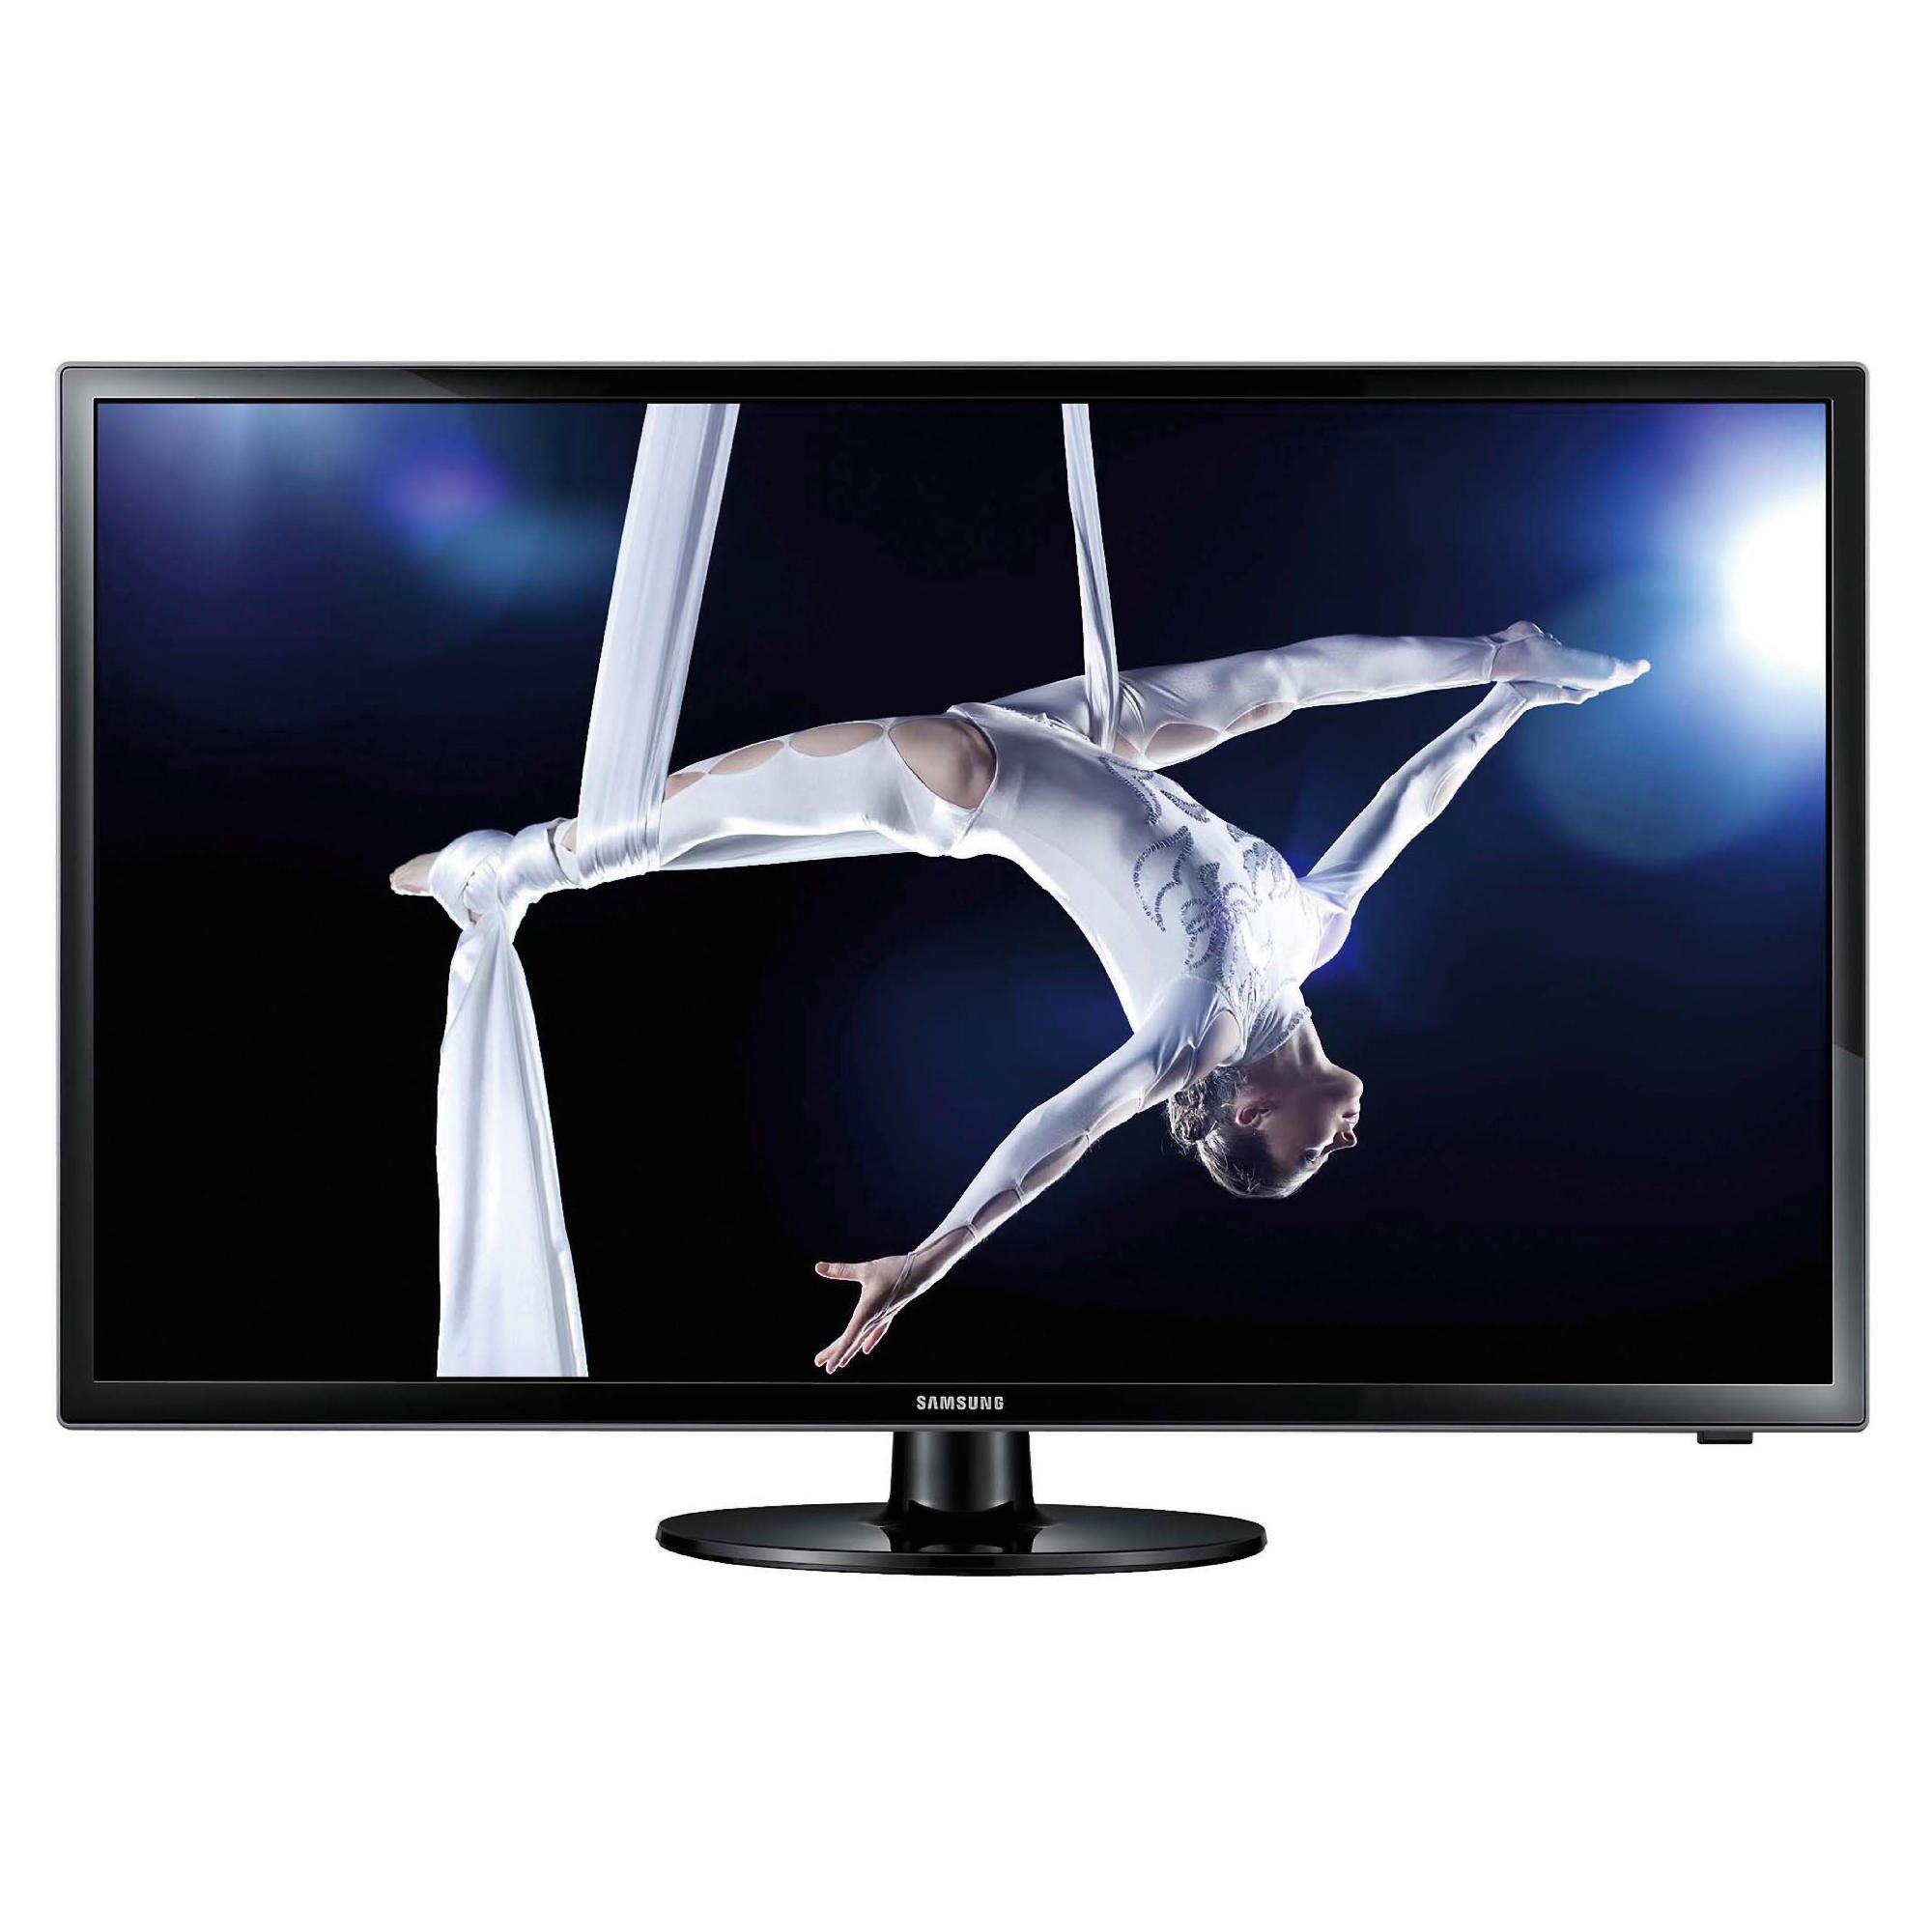 Samsung UE19F4000 19 inch HD Ready 720p E-LED TV with Freeview